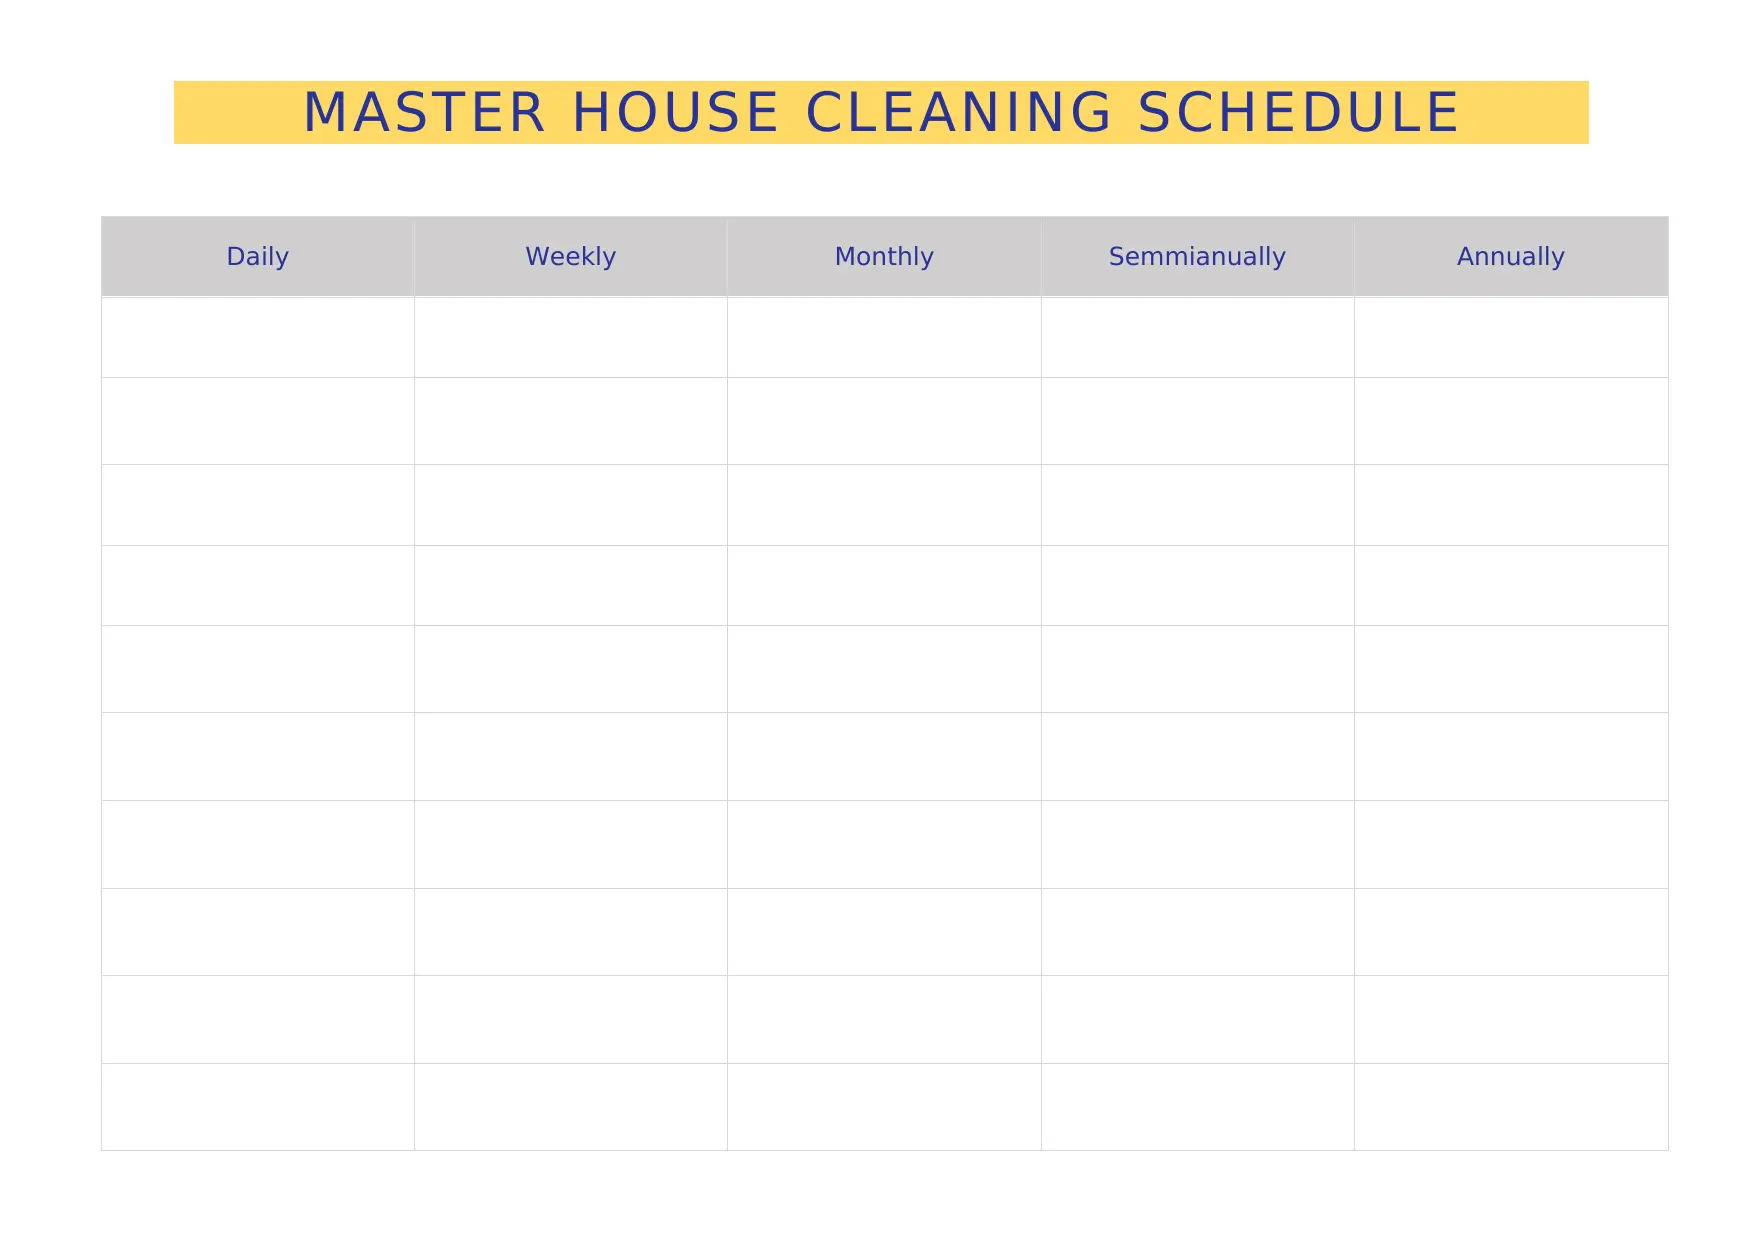 Master House Cleaning Schedule